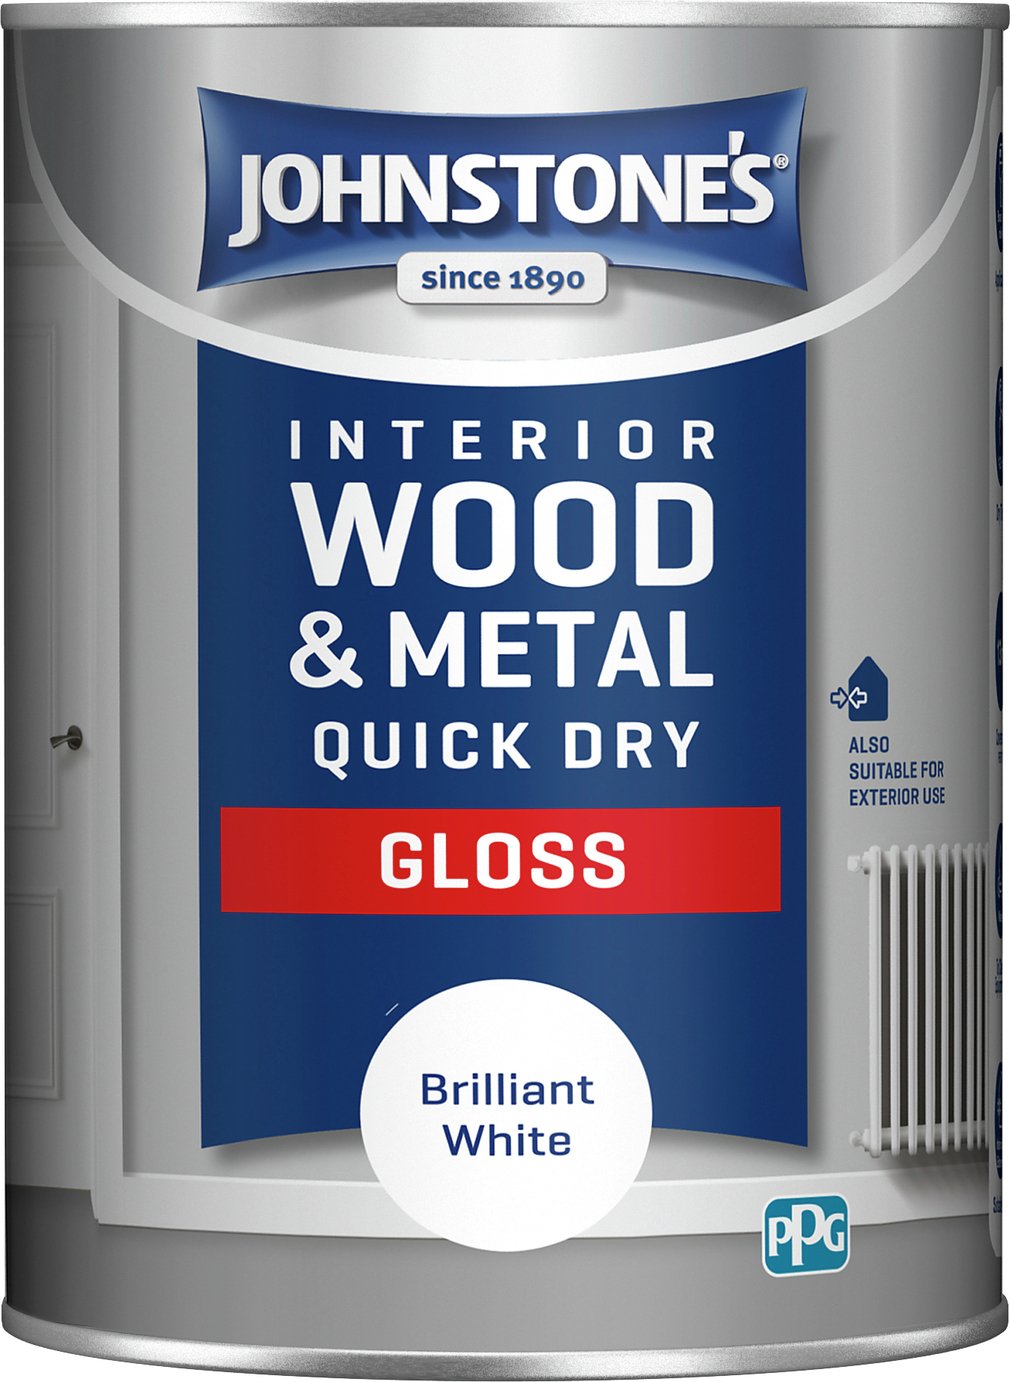 Johnstone's Quick Dry Gloss Paint 1.25L Review